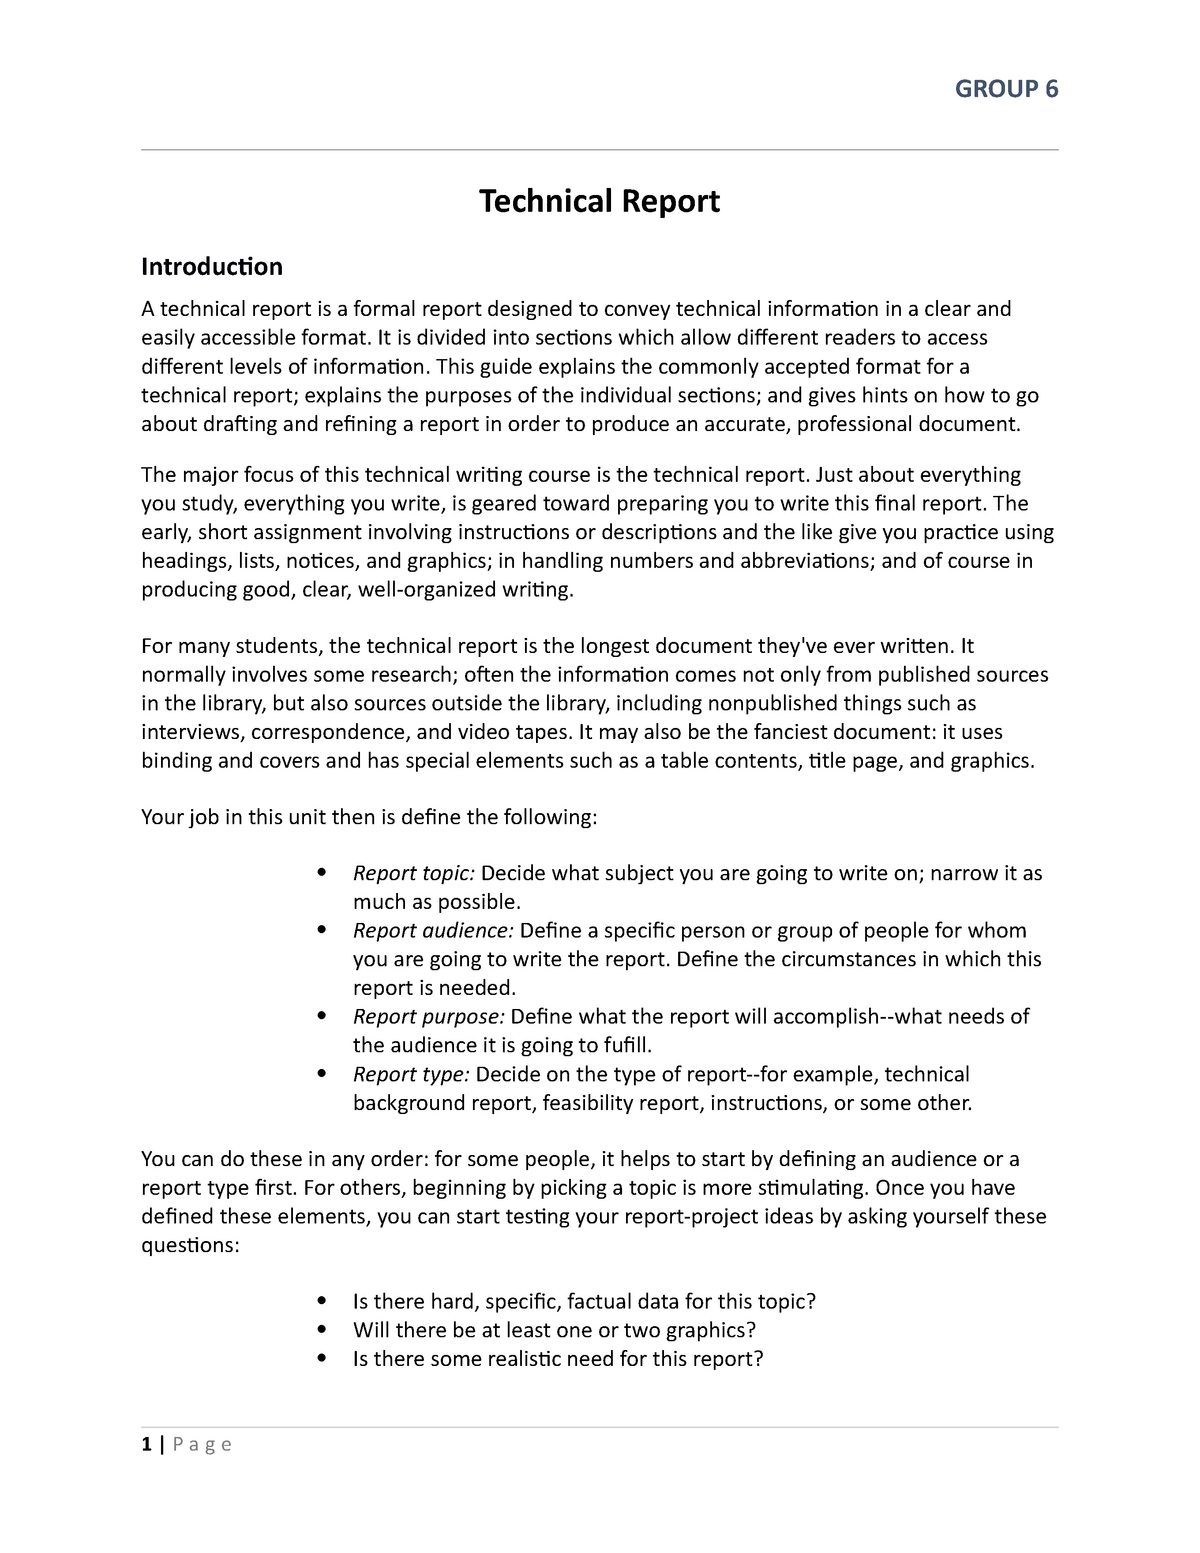 what technical report writing